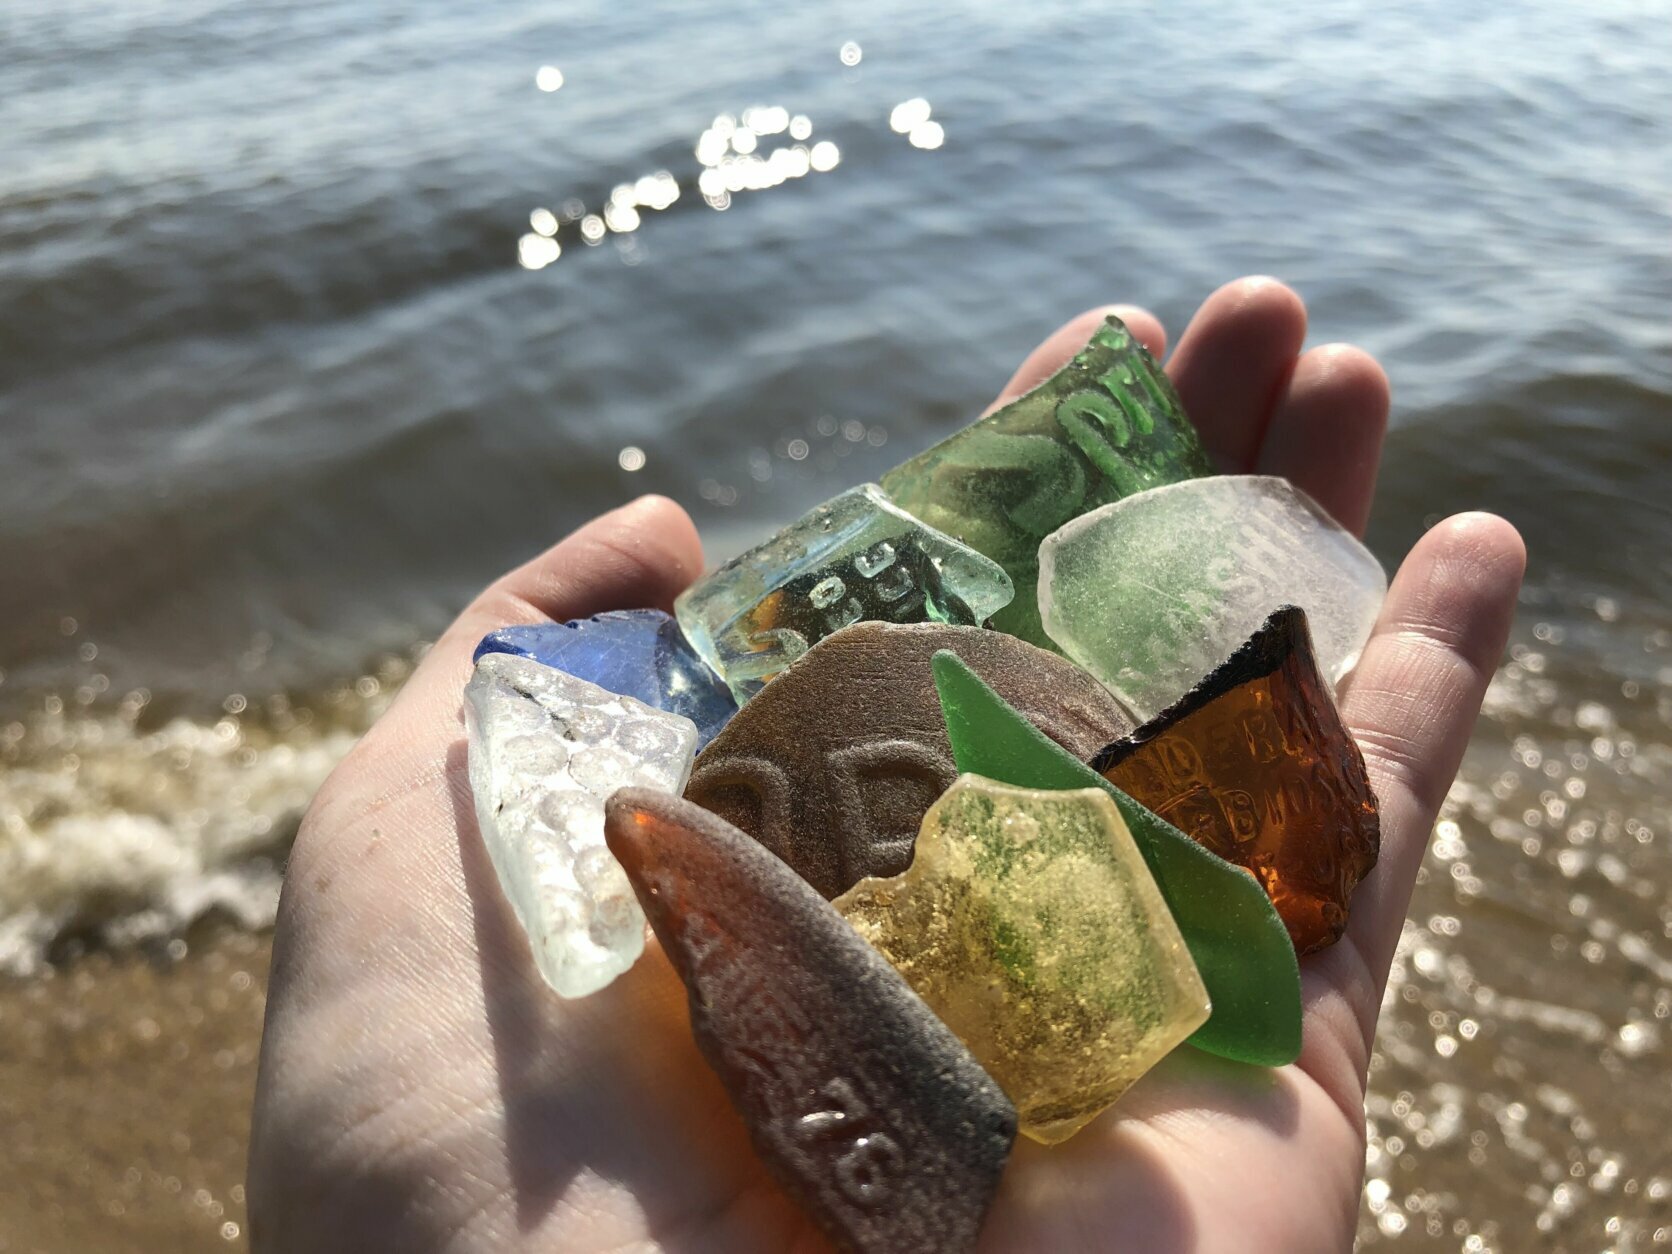 What Beaches Have Sea Glass